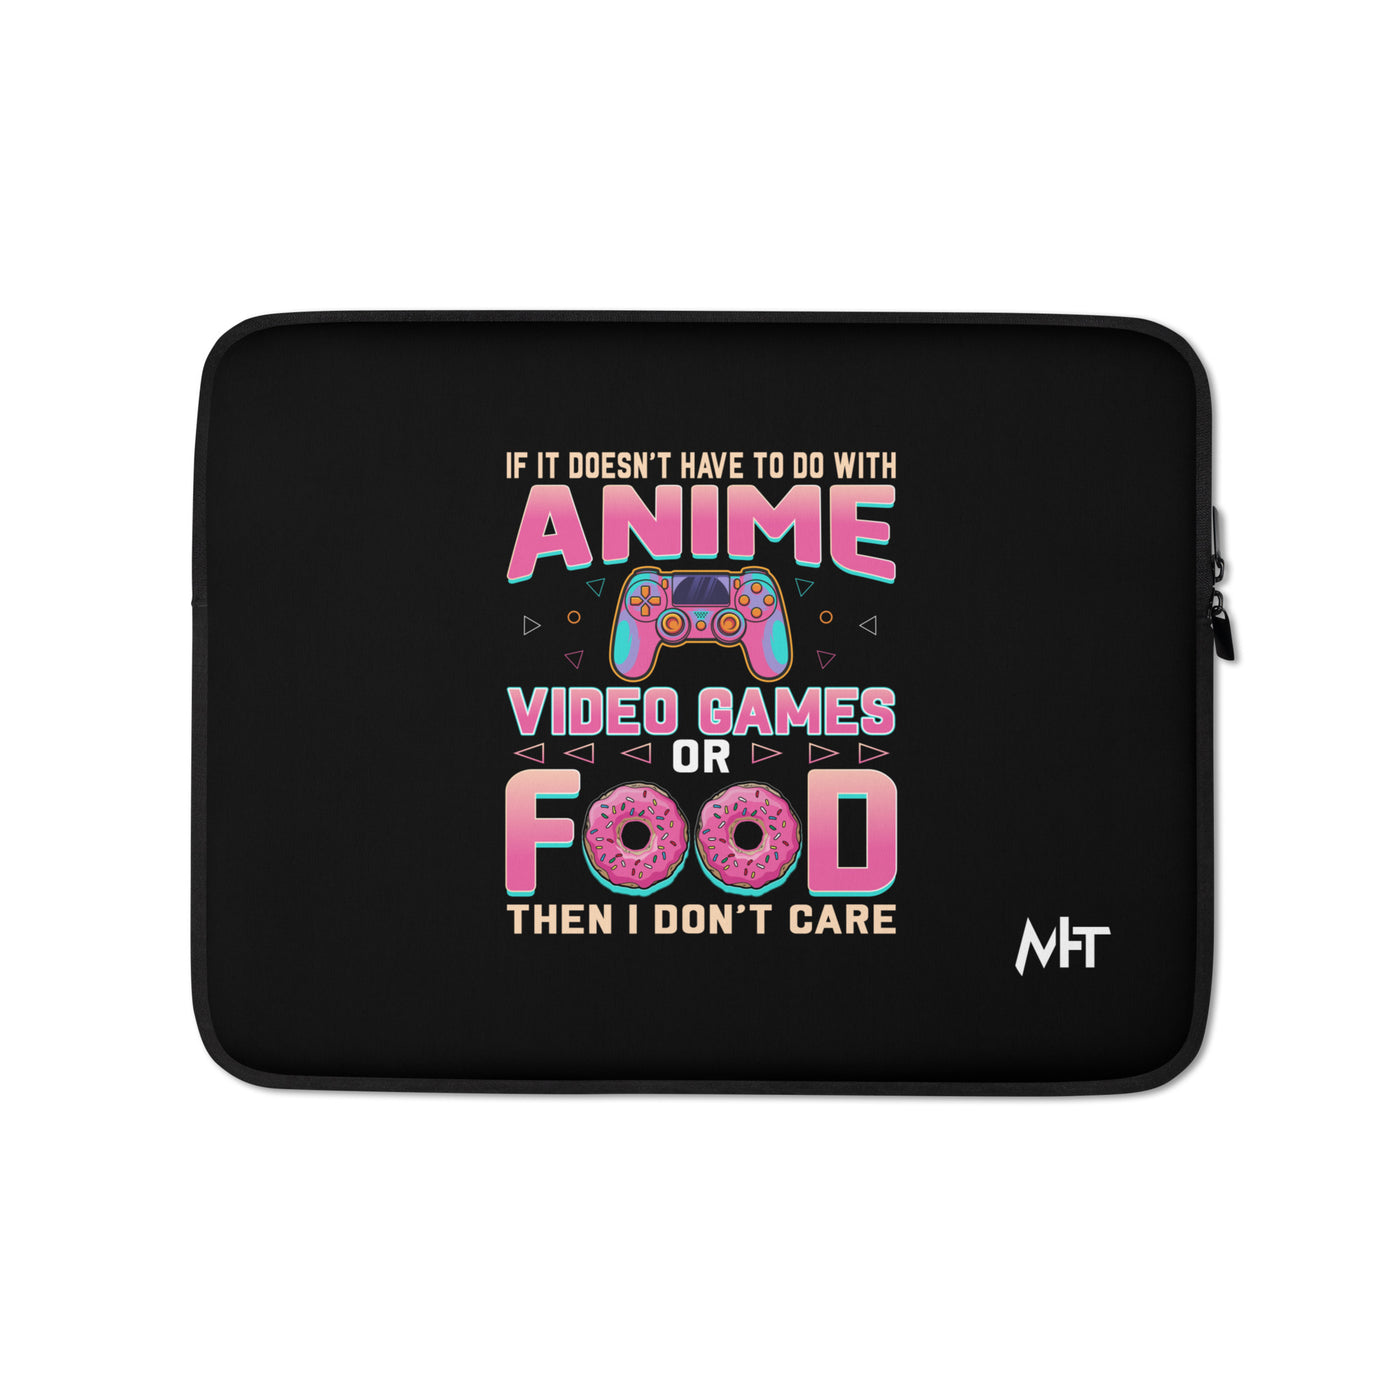 If it doesn't have to do with anime Video game, then I don't care - Laptop Sleeve